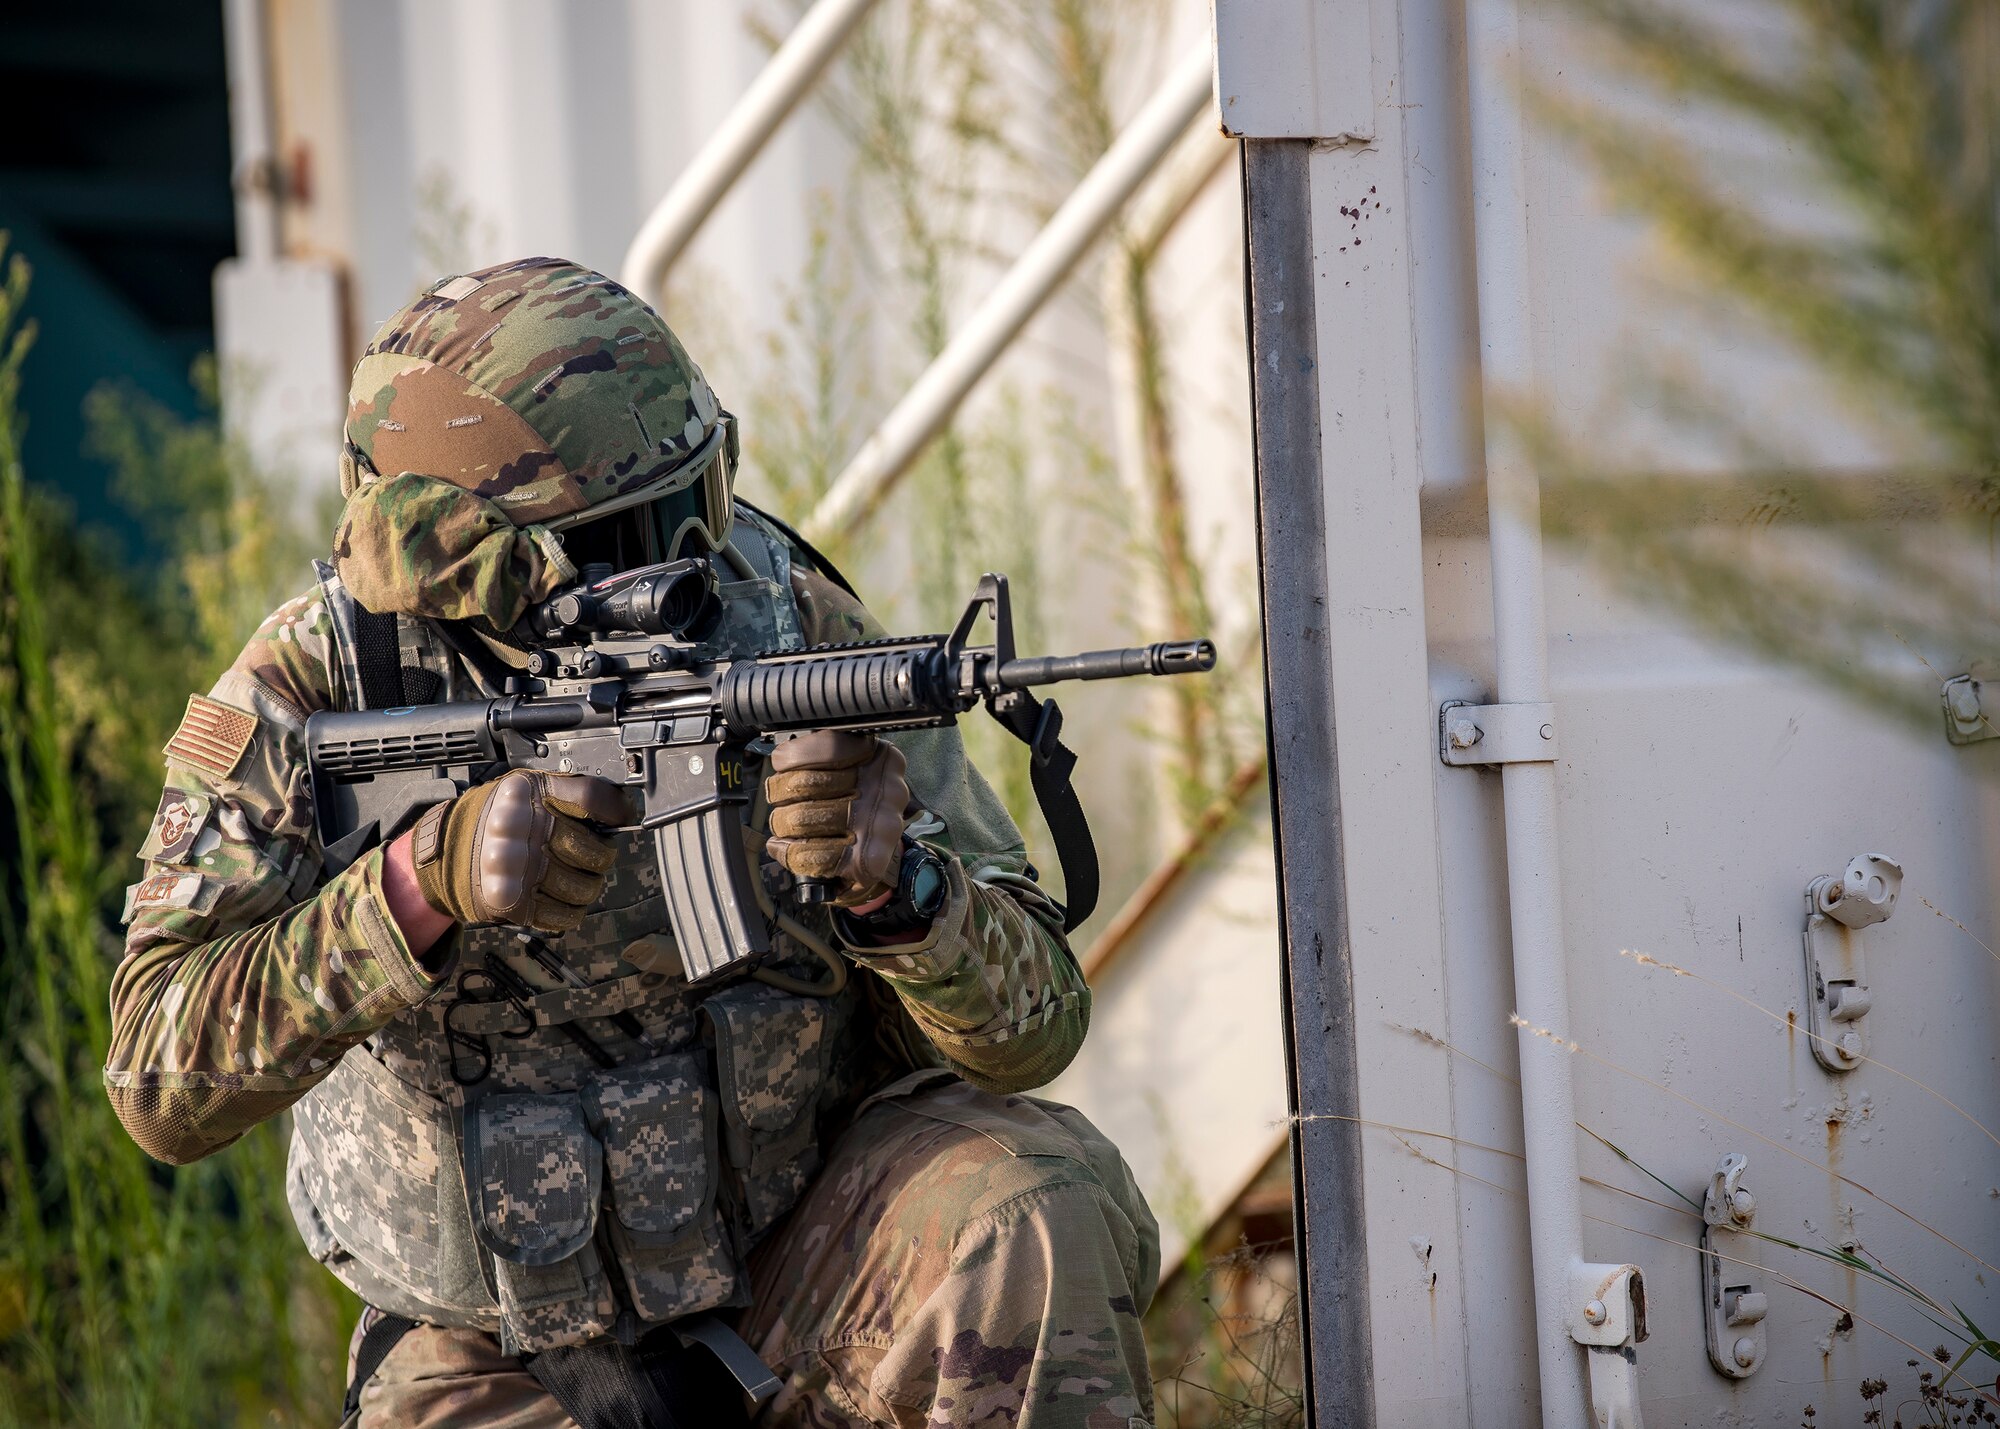 Master Sgt. Ryan Kegler, 3d Weather Squadron Det 1 section chief of division weather operations, fires an M4 Carbine during a certification field exercise (CFX), July 29, 2019, at Camp Bowie Training Center, Texas. The CFX was designed to evaluate the squadron’s overall tactical ability and readiness to provide the U.S. Army with full spectrum environmental support to the Joint Task Force (JTF) fight. The CFX immersed Airmen into all the aspects of what could come with a deployment such as force on force scenarios. (U.S. Air Force photo by Airman 1st Class Eugene Oliver)